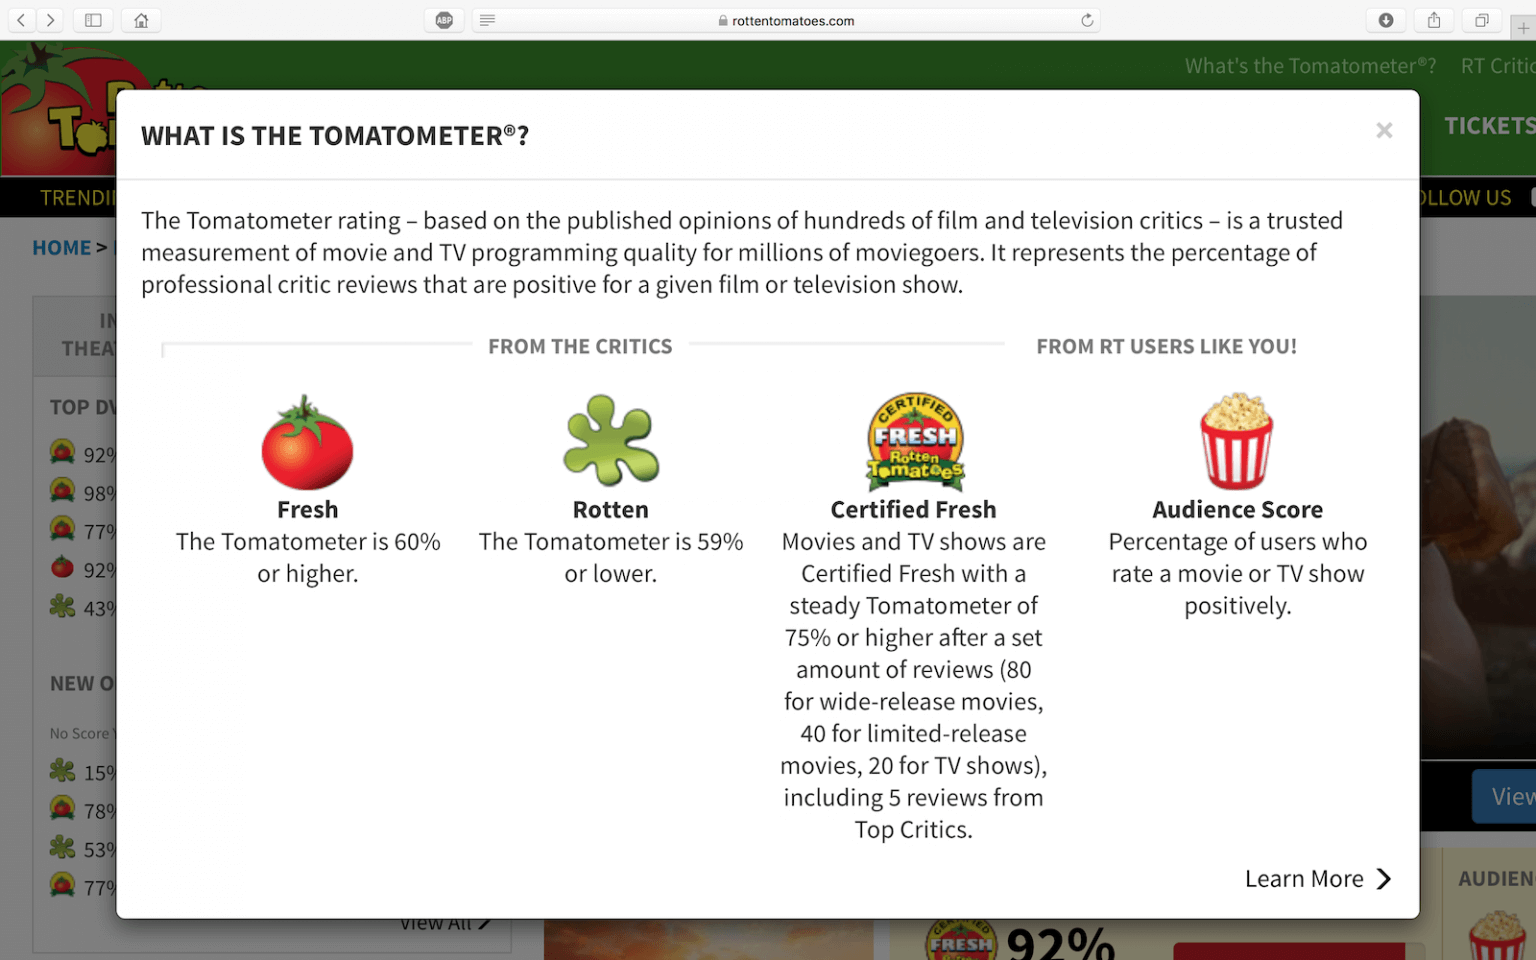 what does rotten tomatoes mean in movie reviews